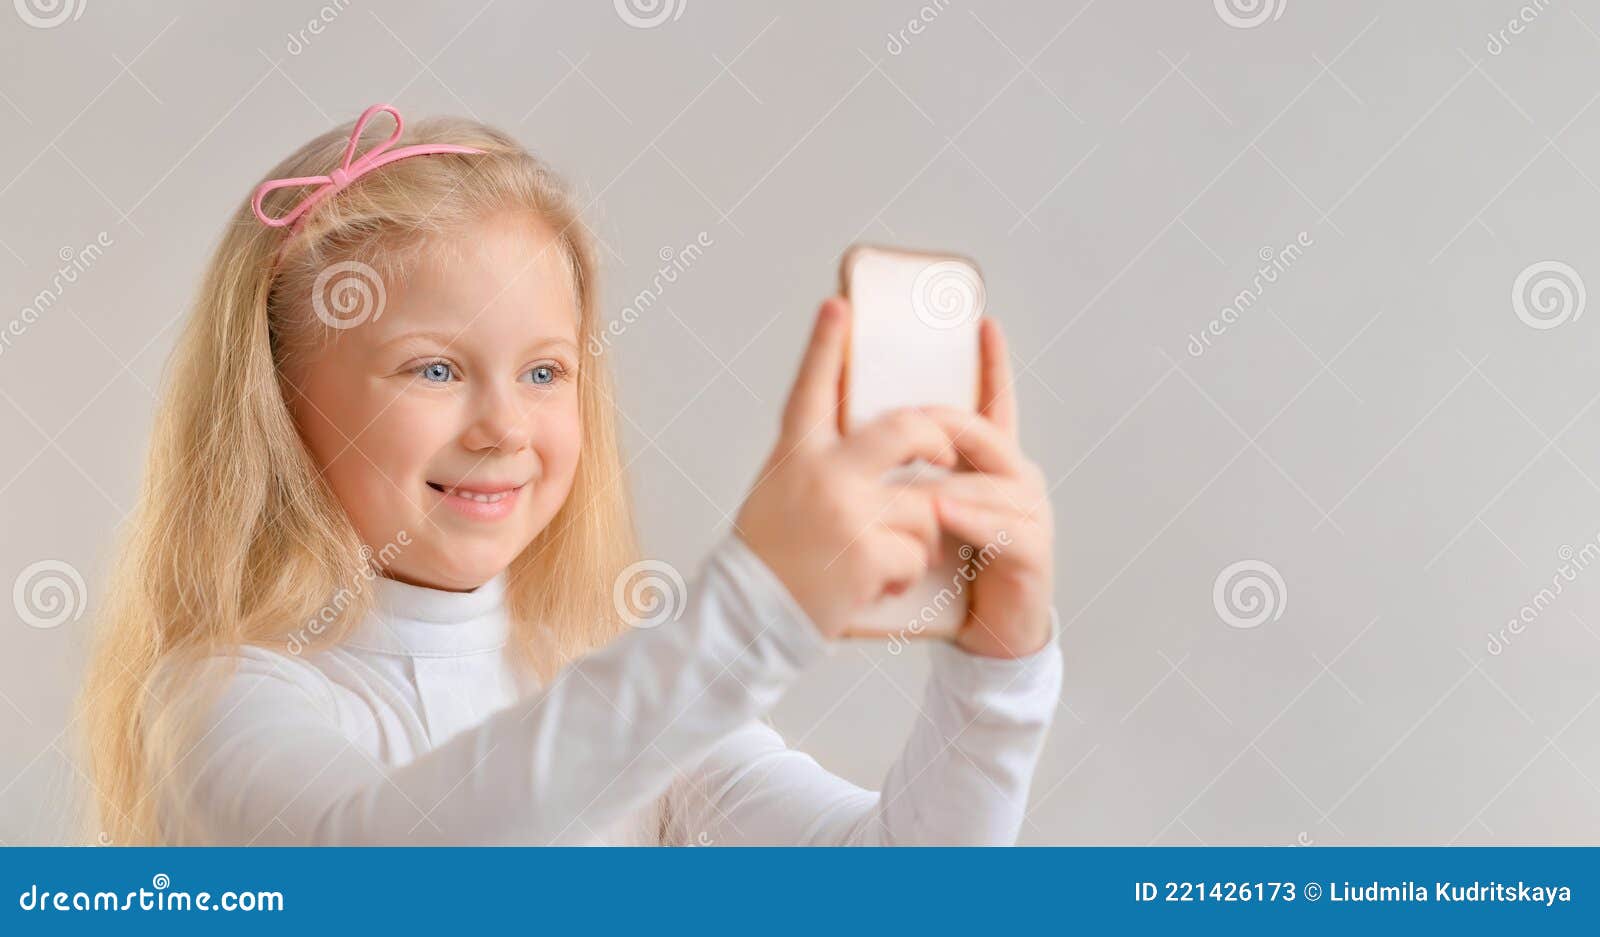 Beautiful Smiling Little Girl Taking a Selfie Photo with Smartphone ...